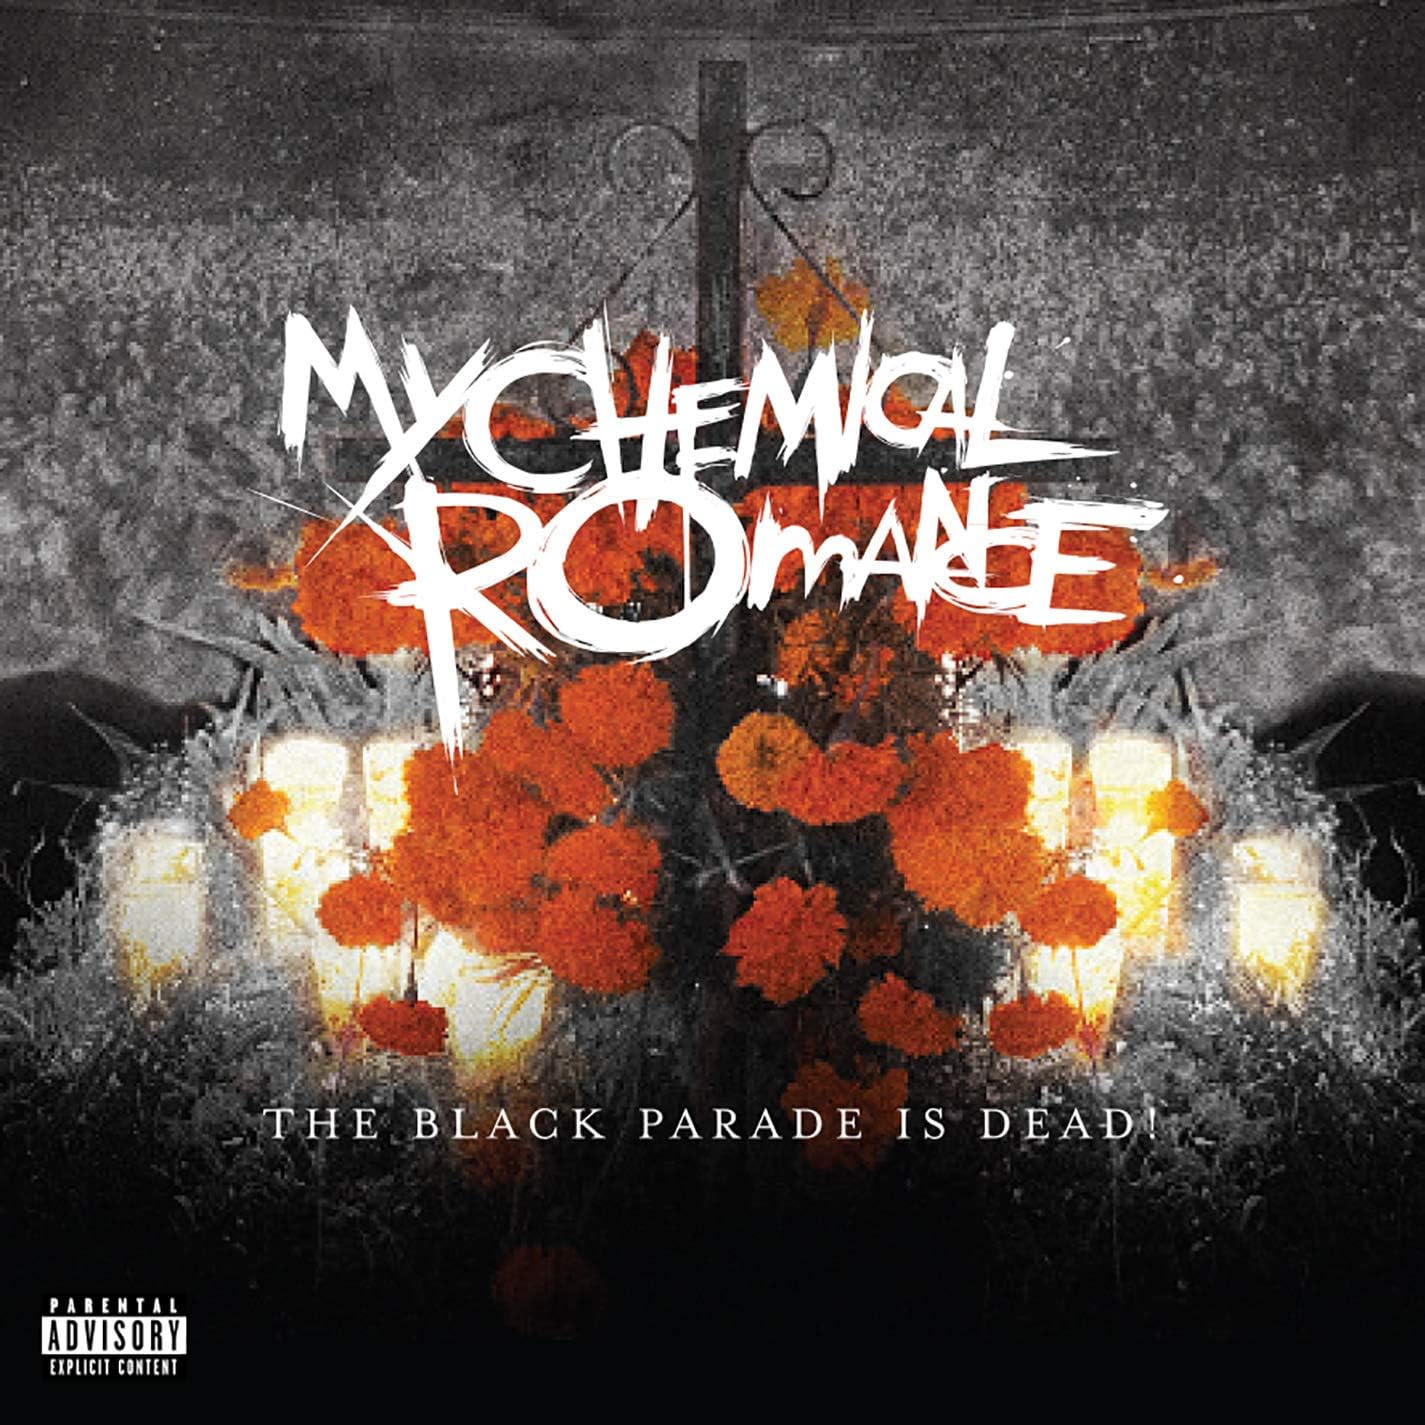 The Black Parade is Dead! - My Chemical Romance Live in Mexico City